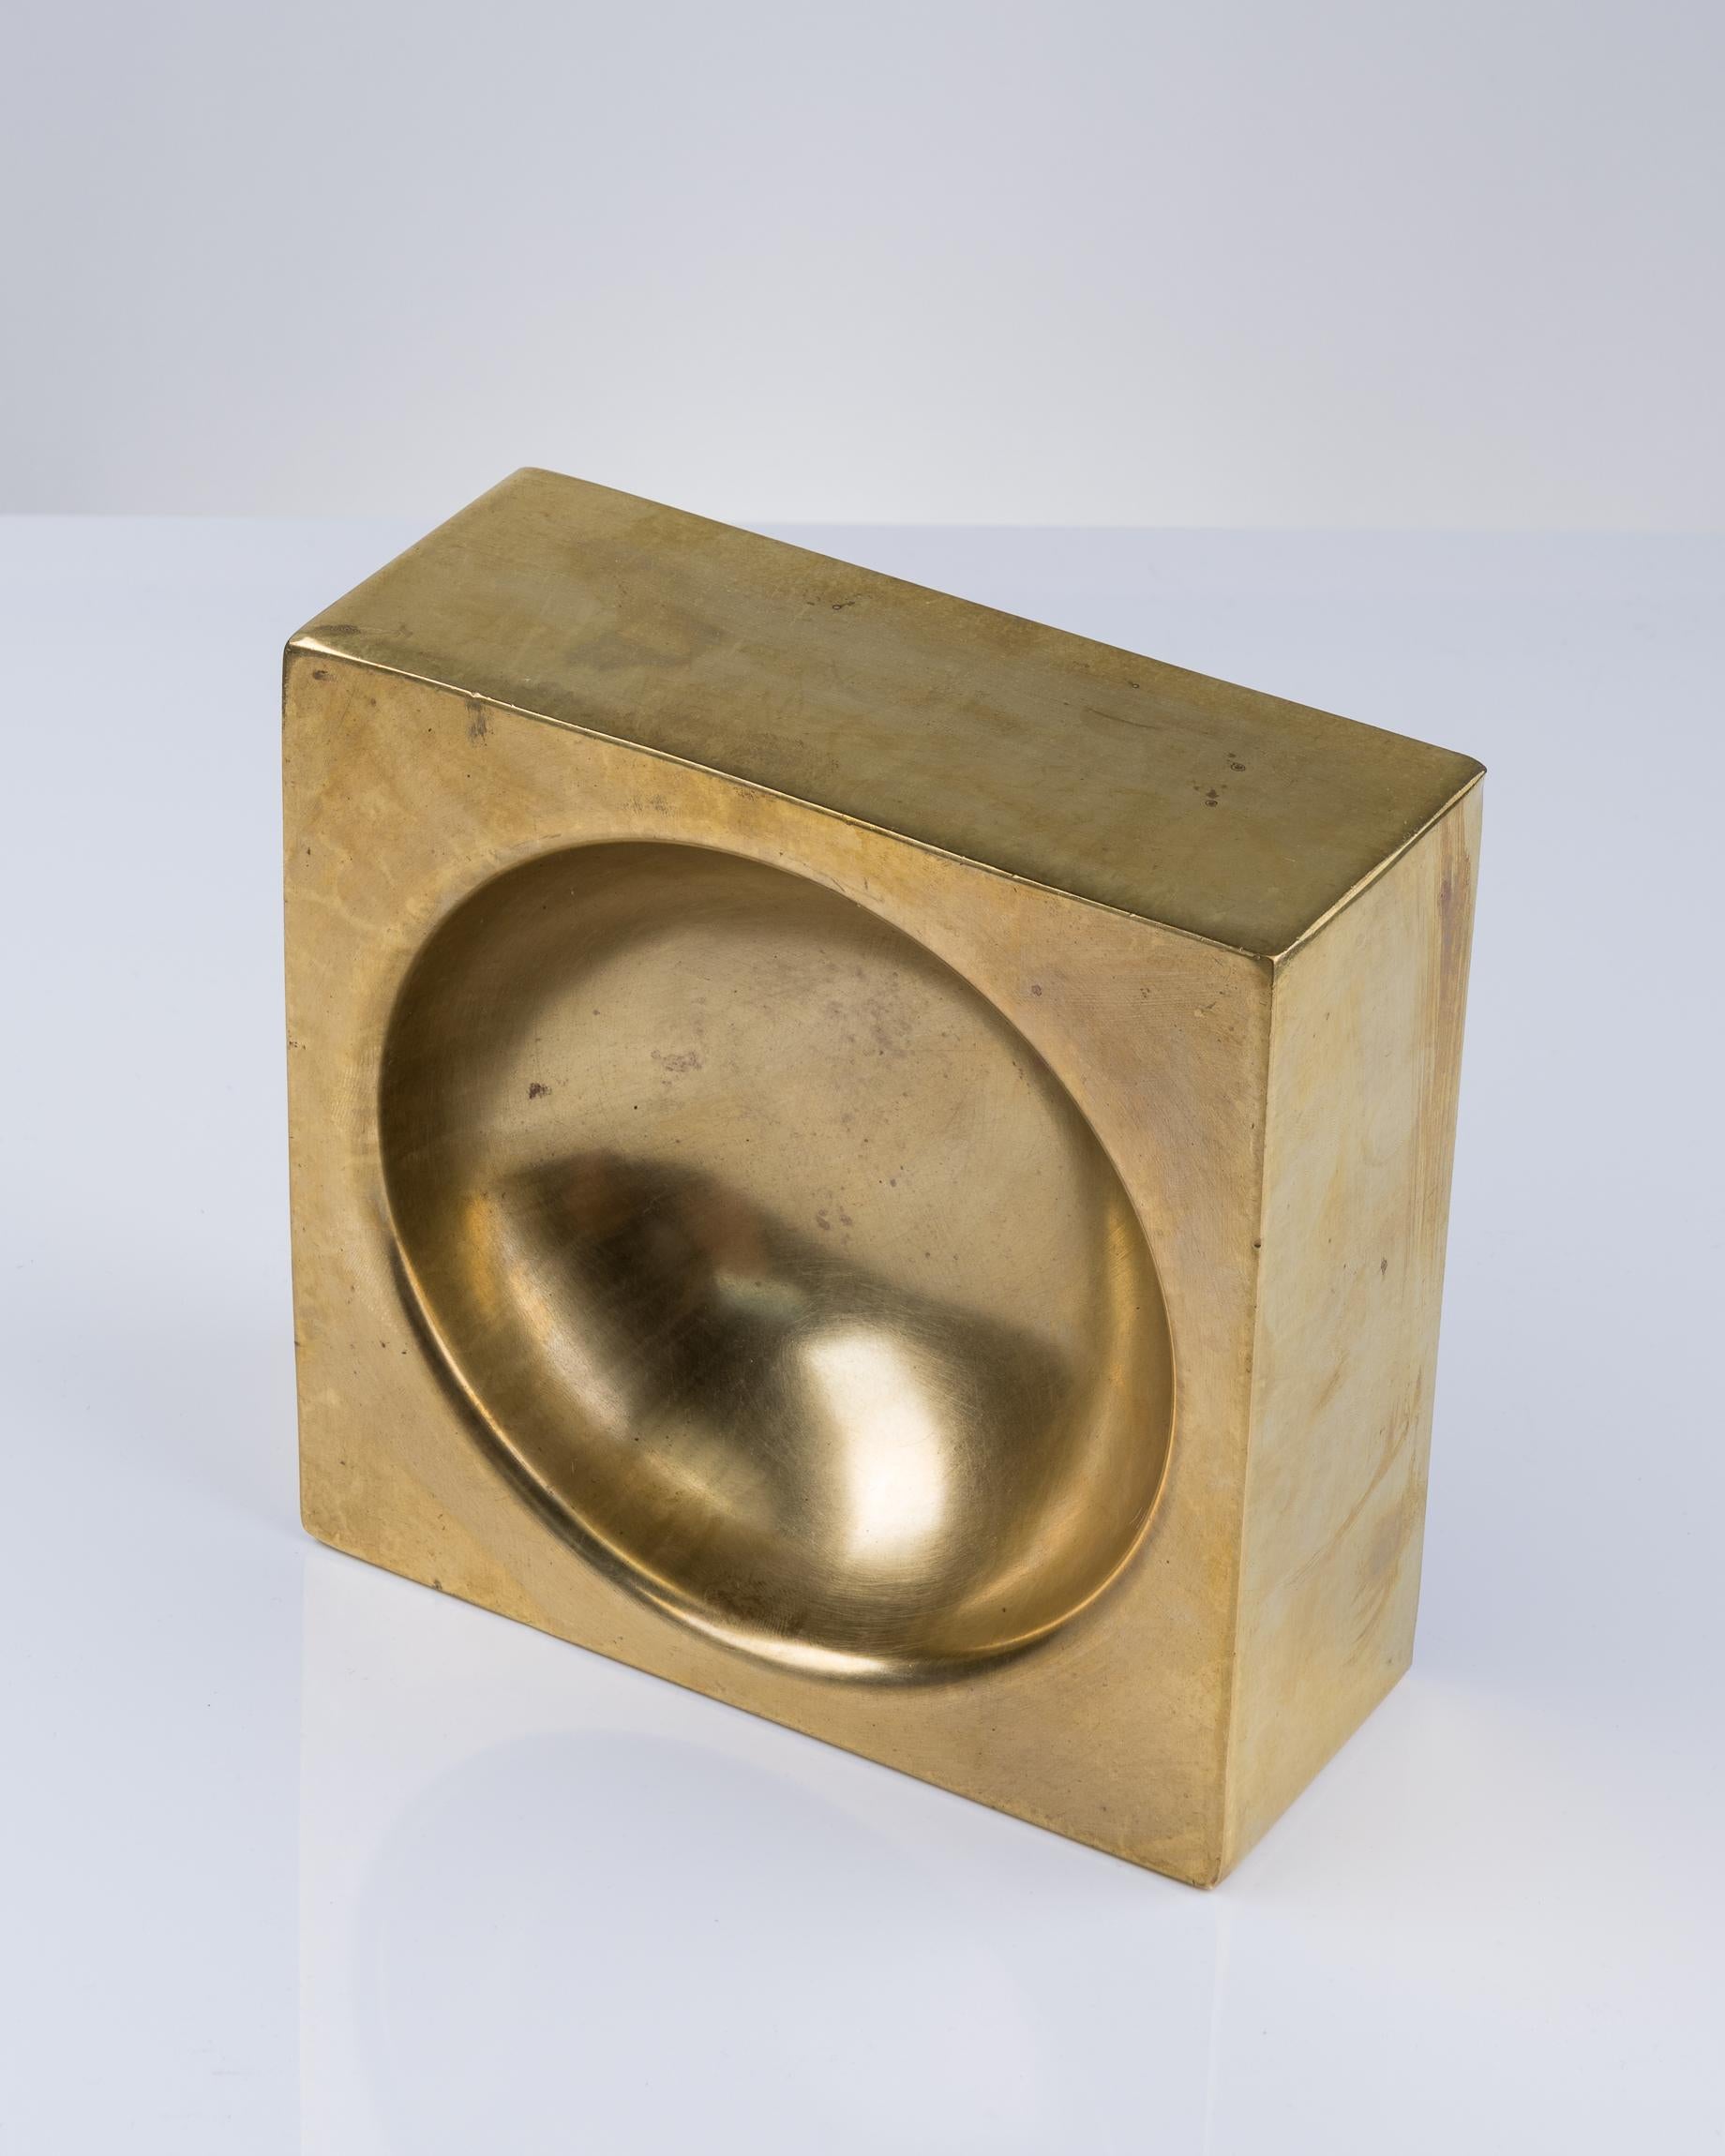 Minimalist patinated full metal catchall
This rare seamless vide poche is made of an embossed single sheet of brass
in very good vintage condition
this item will ship from France and can be returned to either France or upstate NY location in the